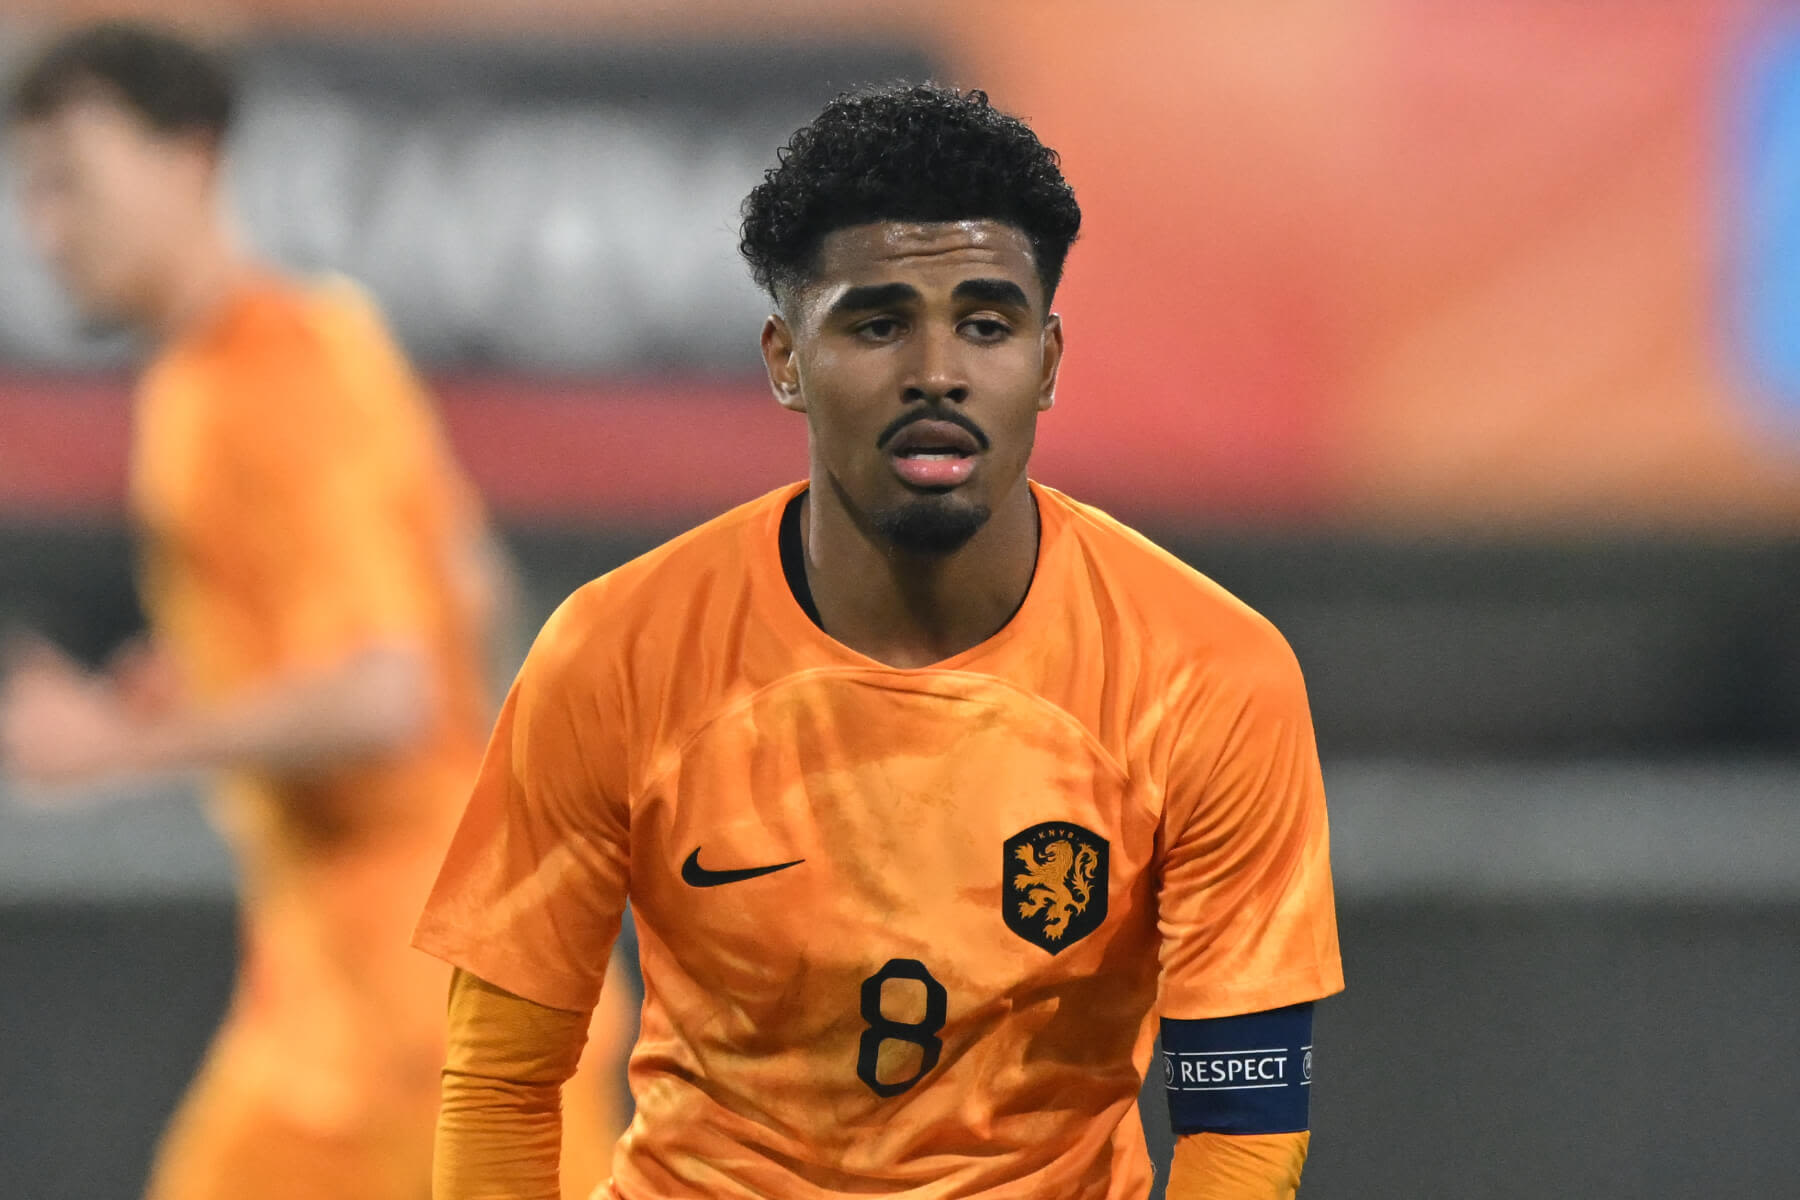 Netherlands' Euro 2024 squad: Maatsen and De Jong named in provisional squad